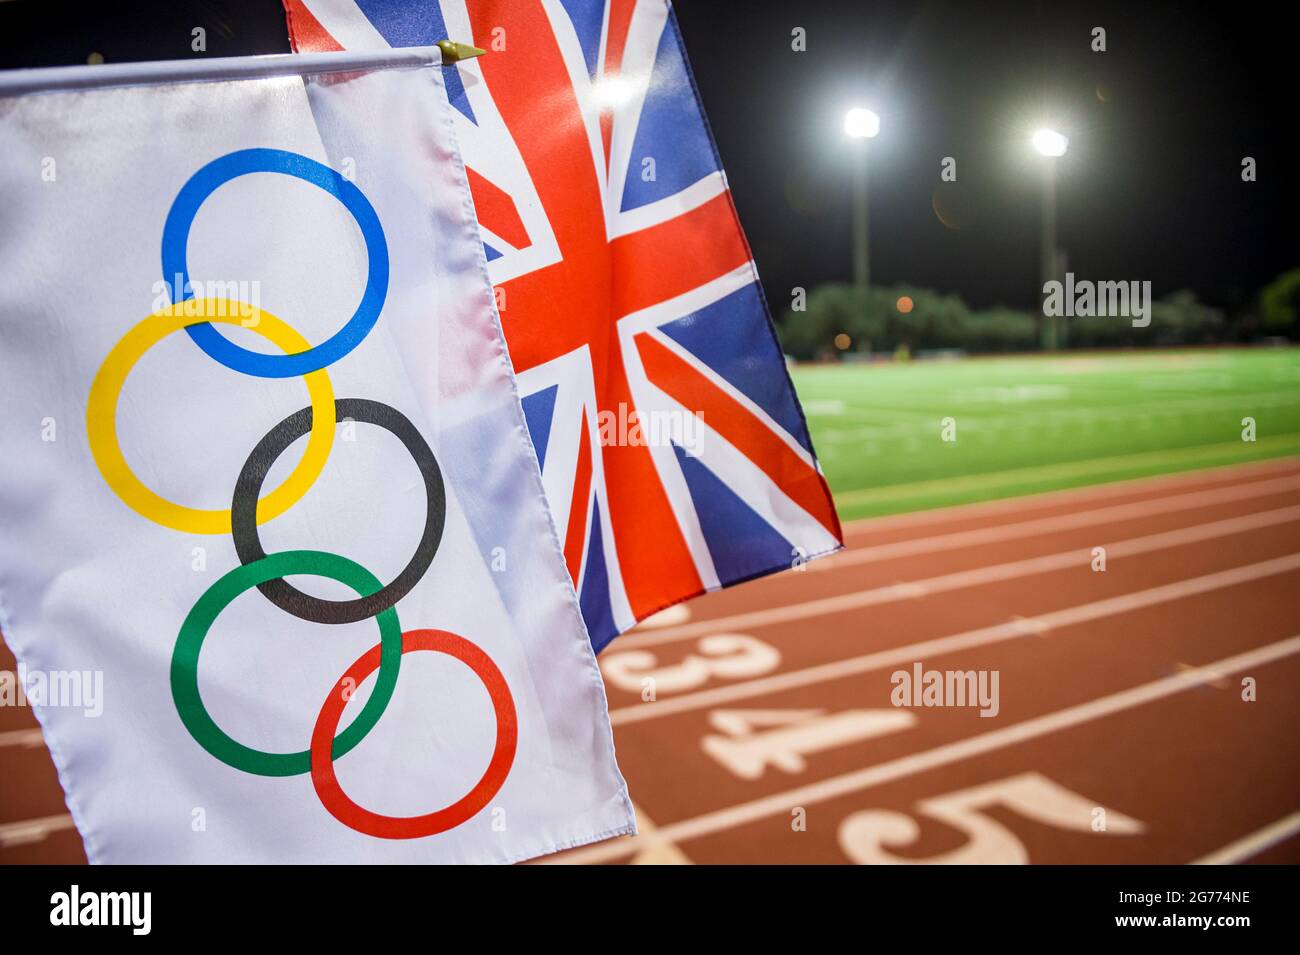 MIAMI, USA - AUGUST 15, 2019: An Olympic and UK Union flag wave together under the floodlights of a red athletics track. Stock Photo